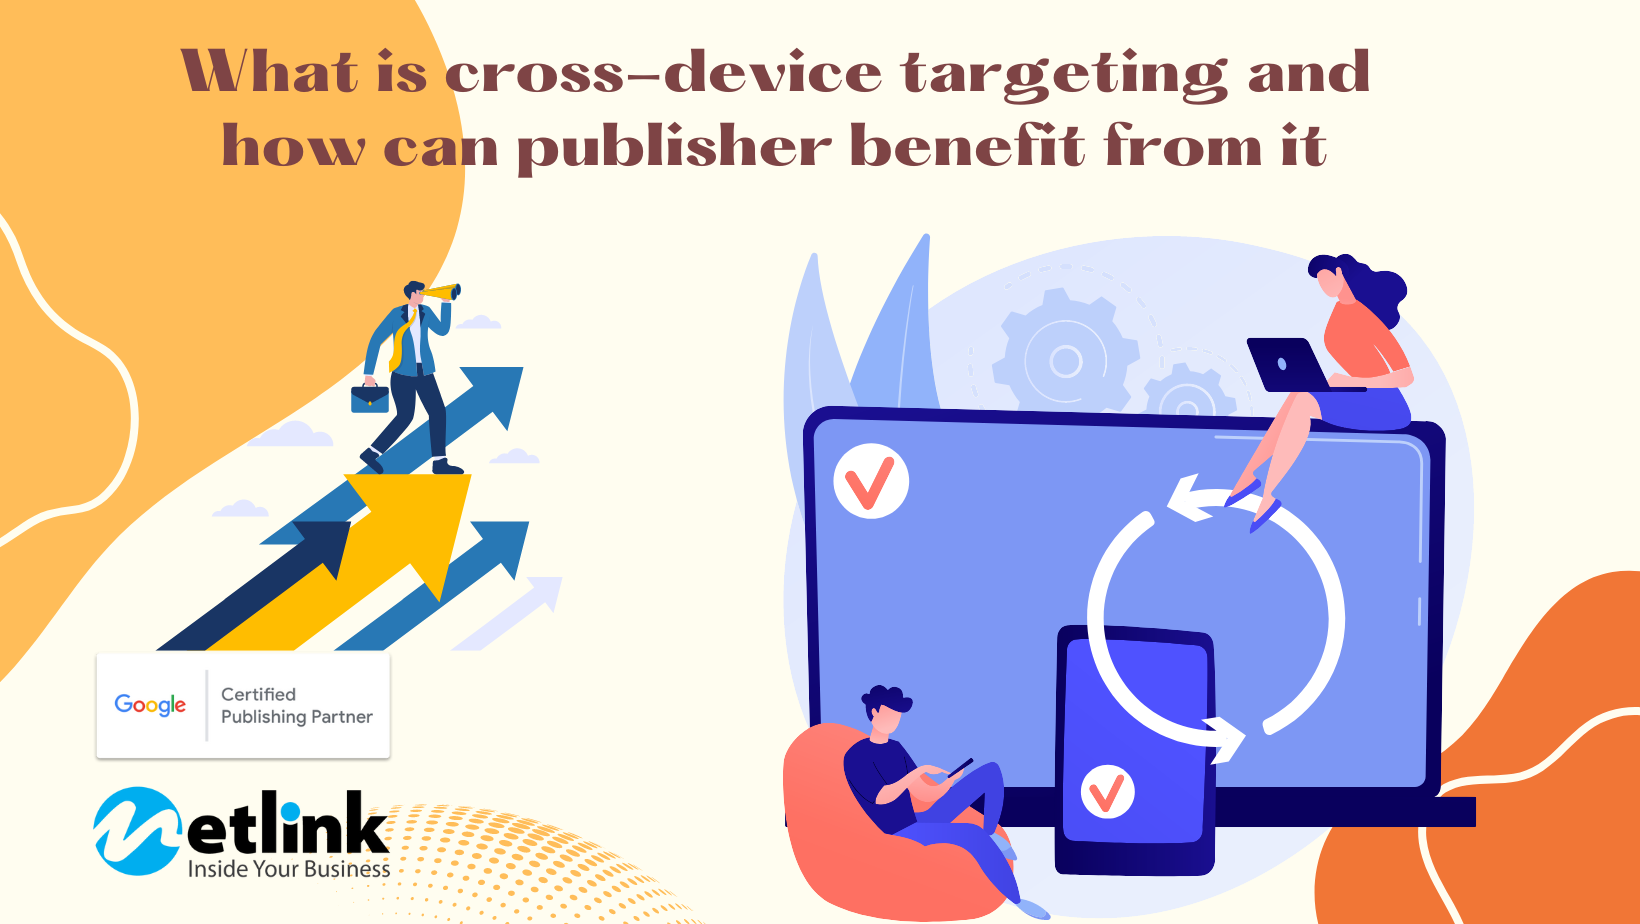 What is cross-device targeting and how can publisher benefit from it